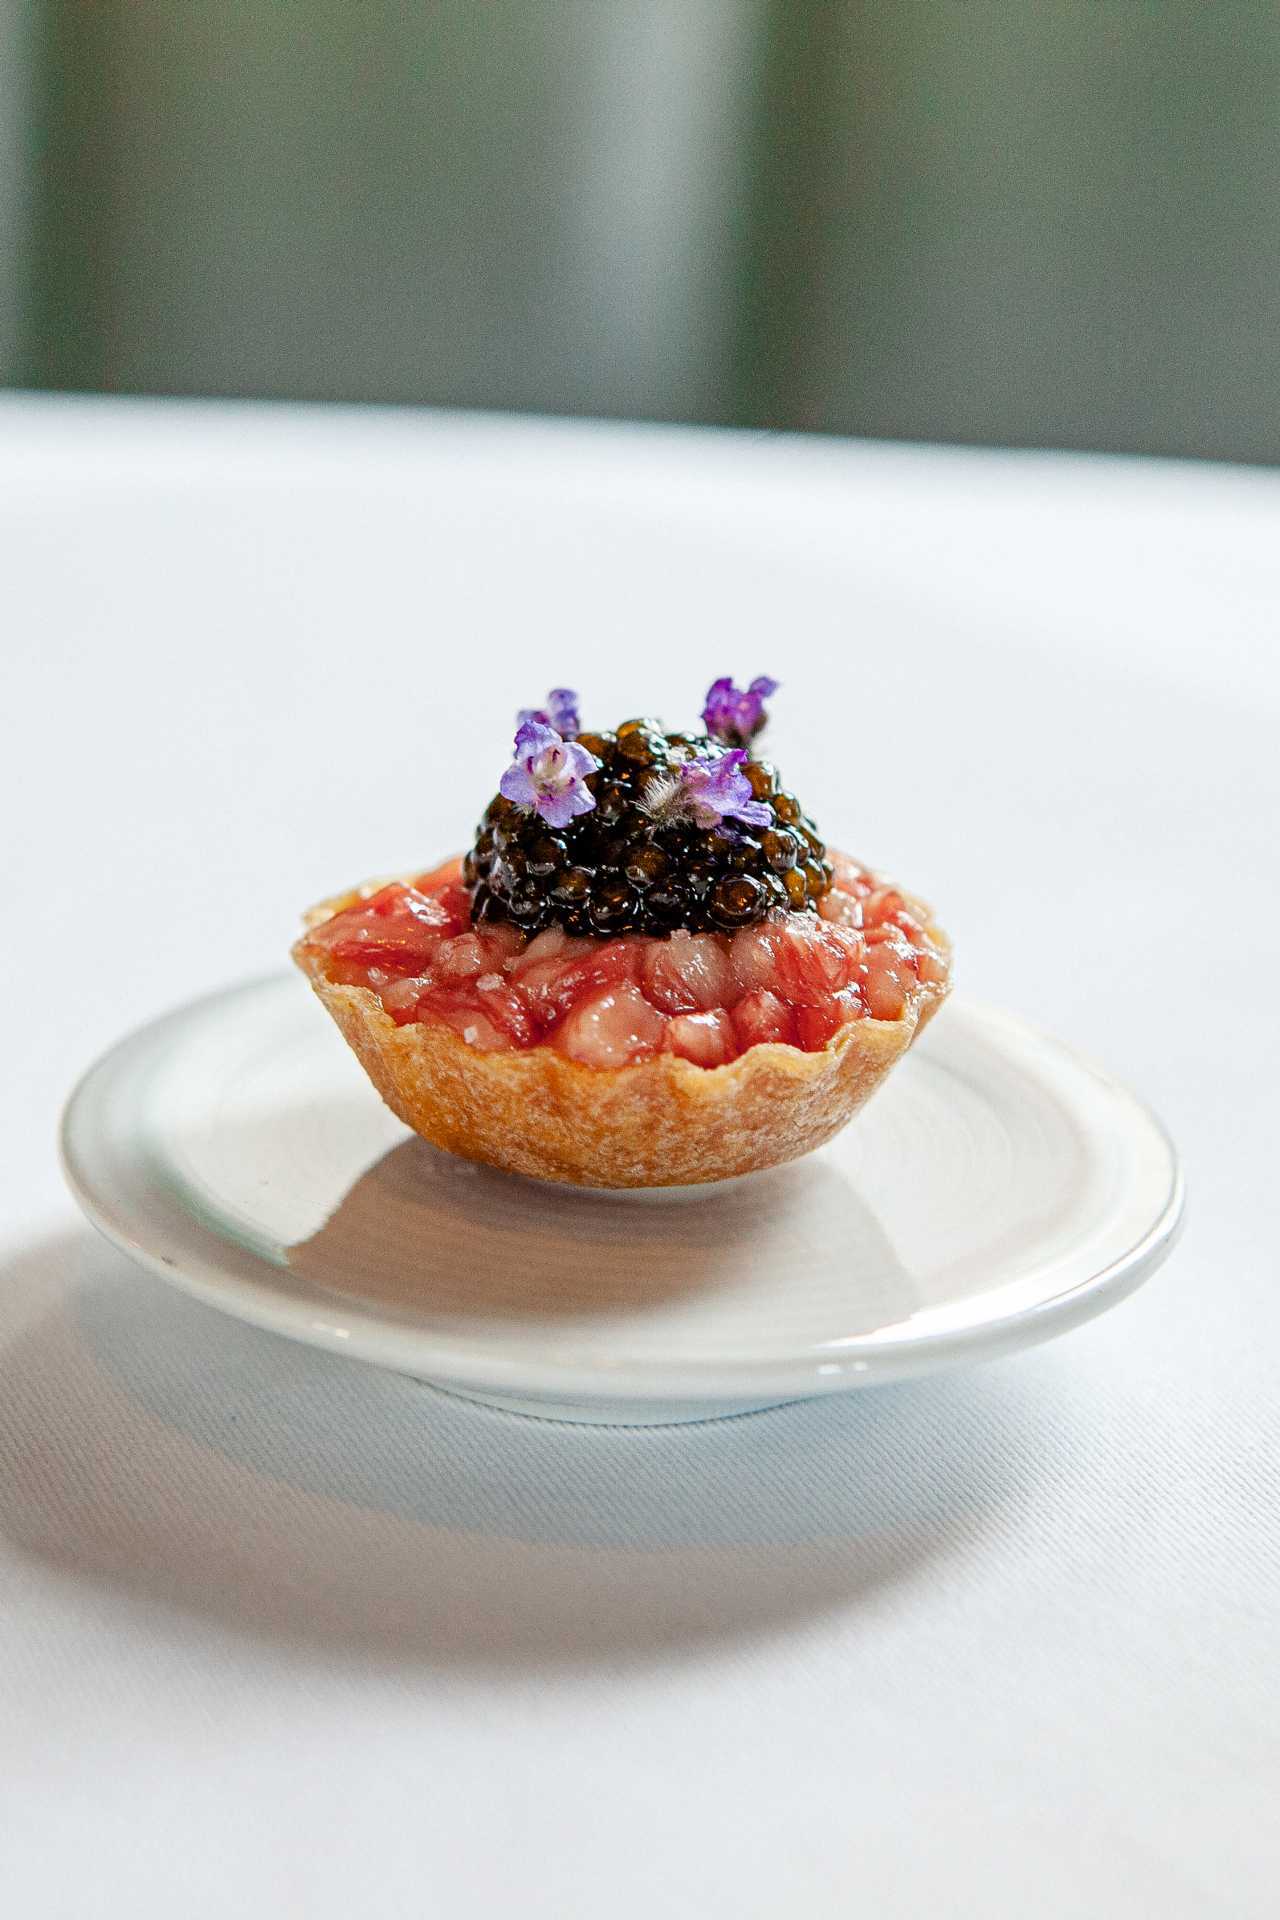 Wagyu beef tartare topped with caviar at Alo